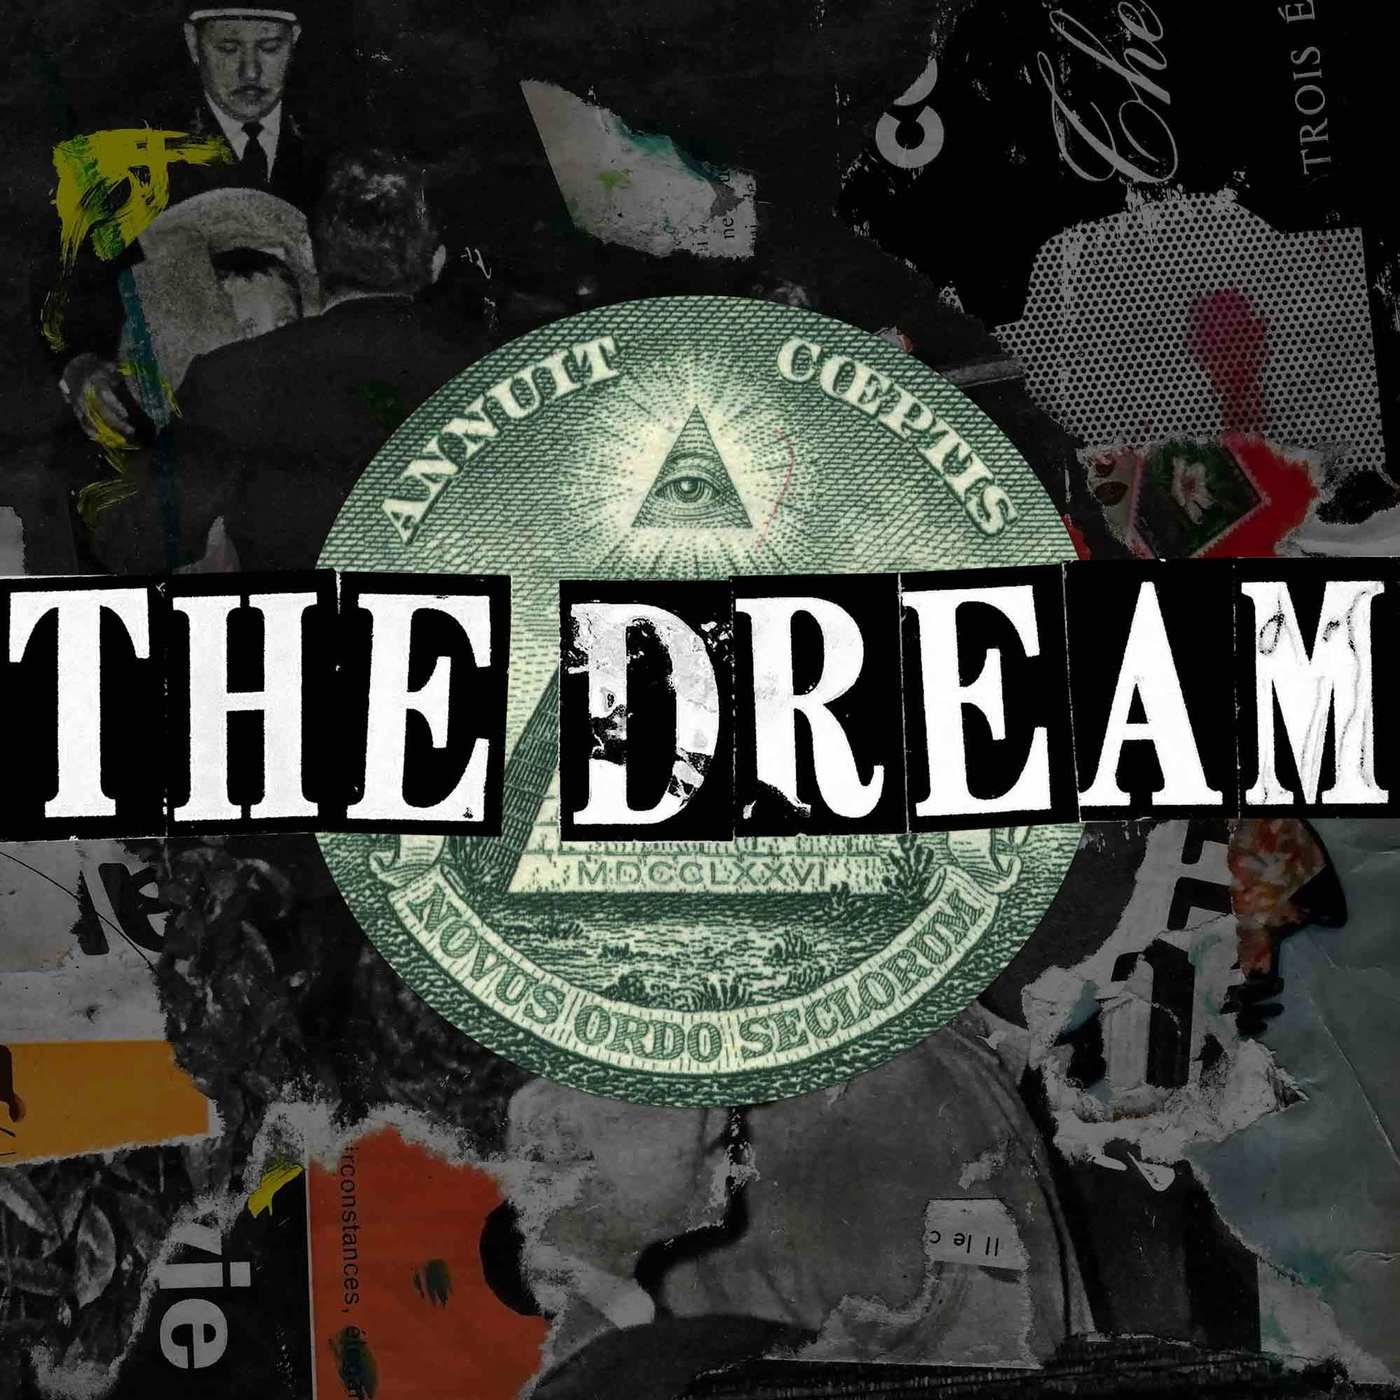 The Dream podcast